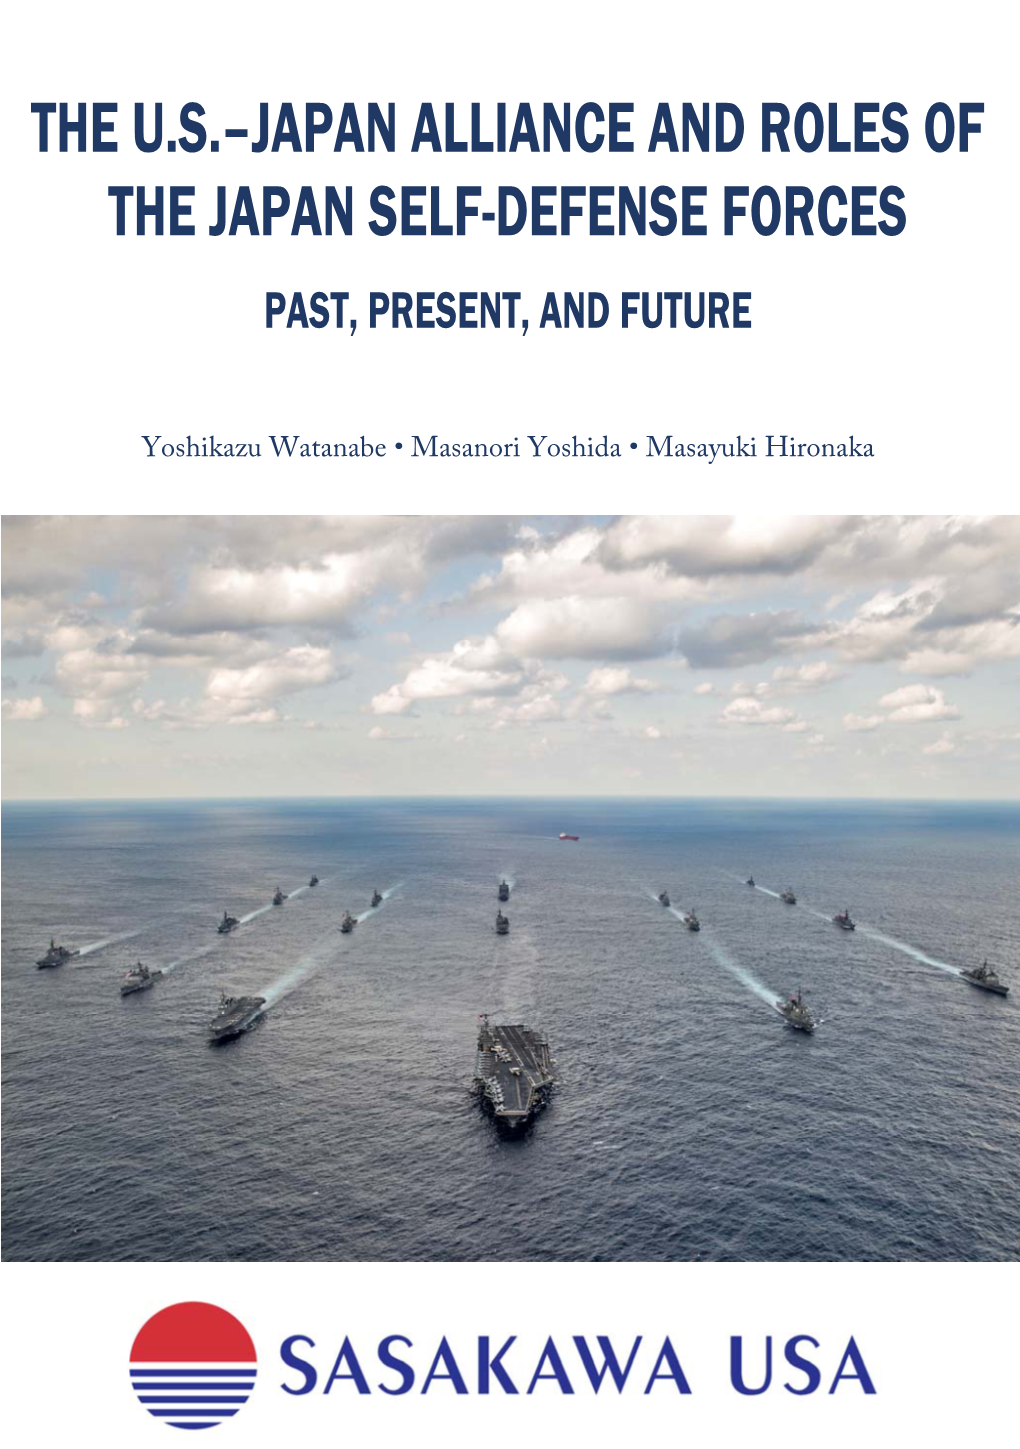 The U.S.–Japan Alliance and Roles of the Japan Self-Defense Forces